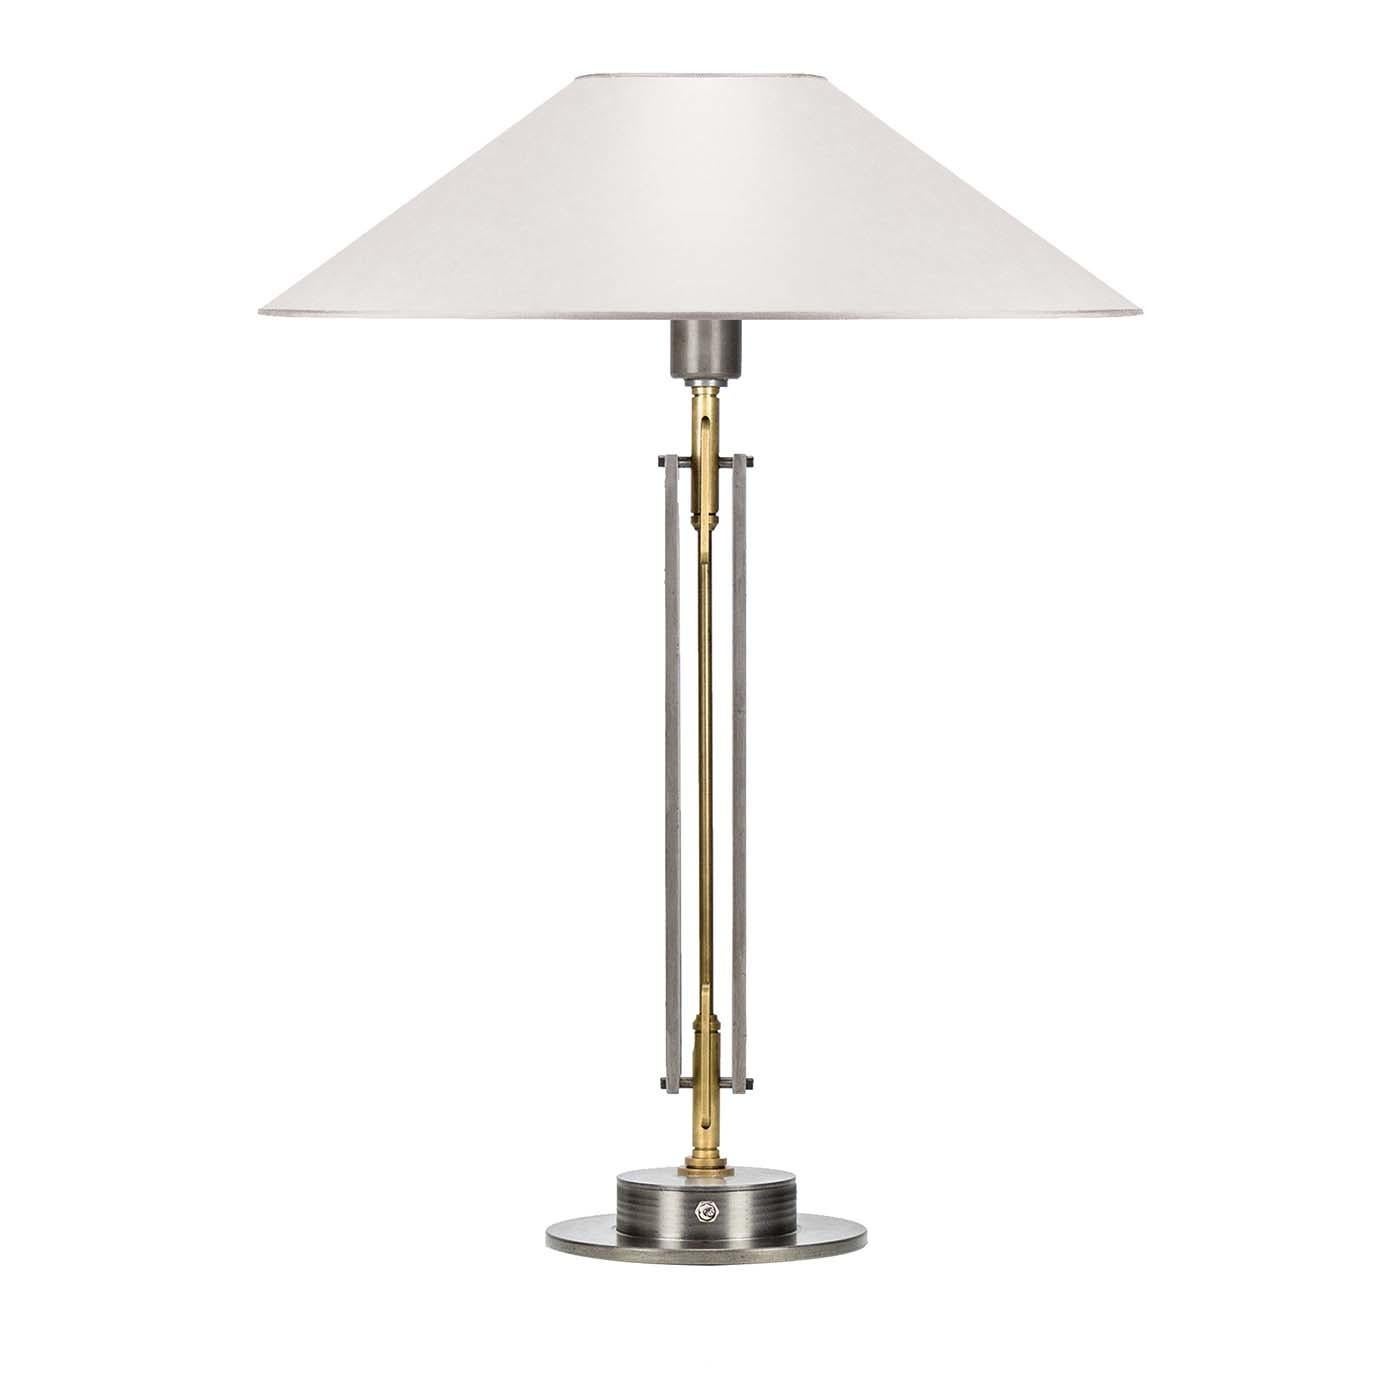 Italian Lenmo White Table Lamp #2 by Acanthus